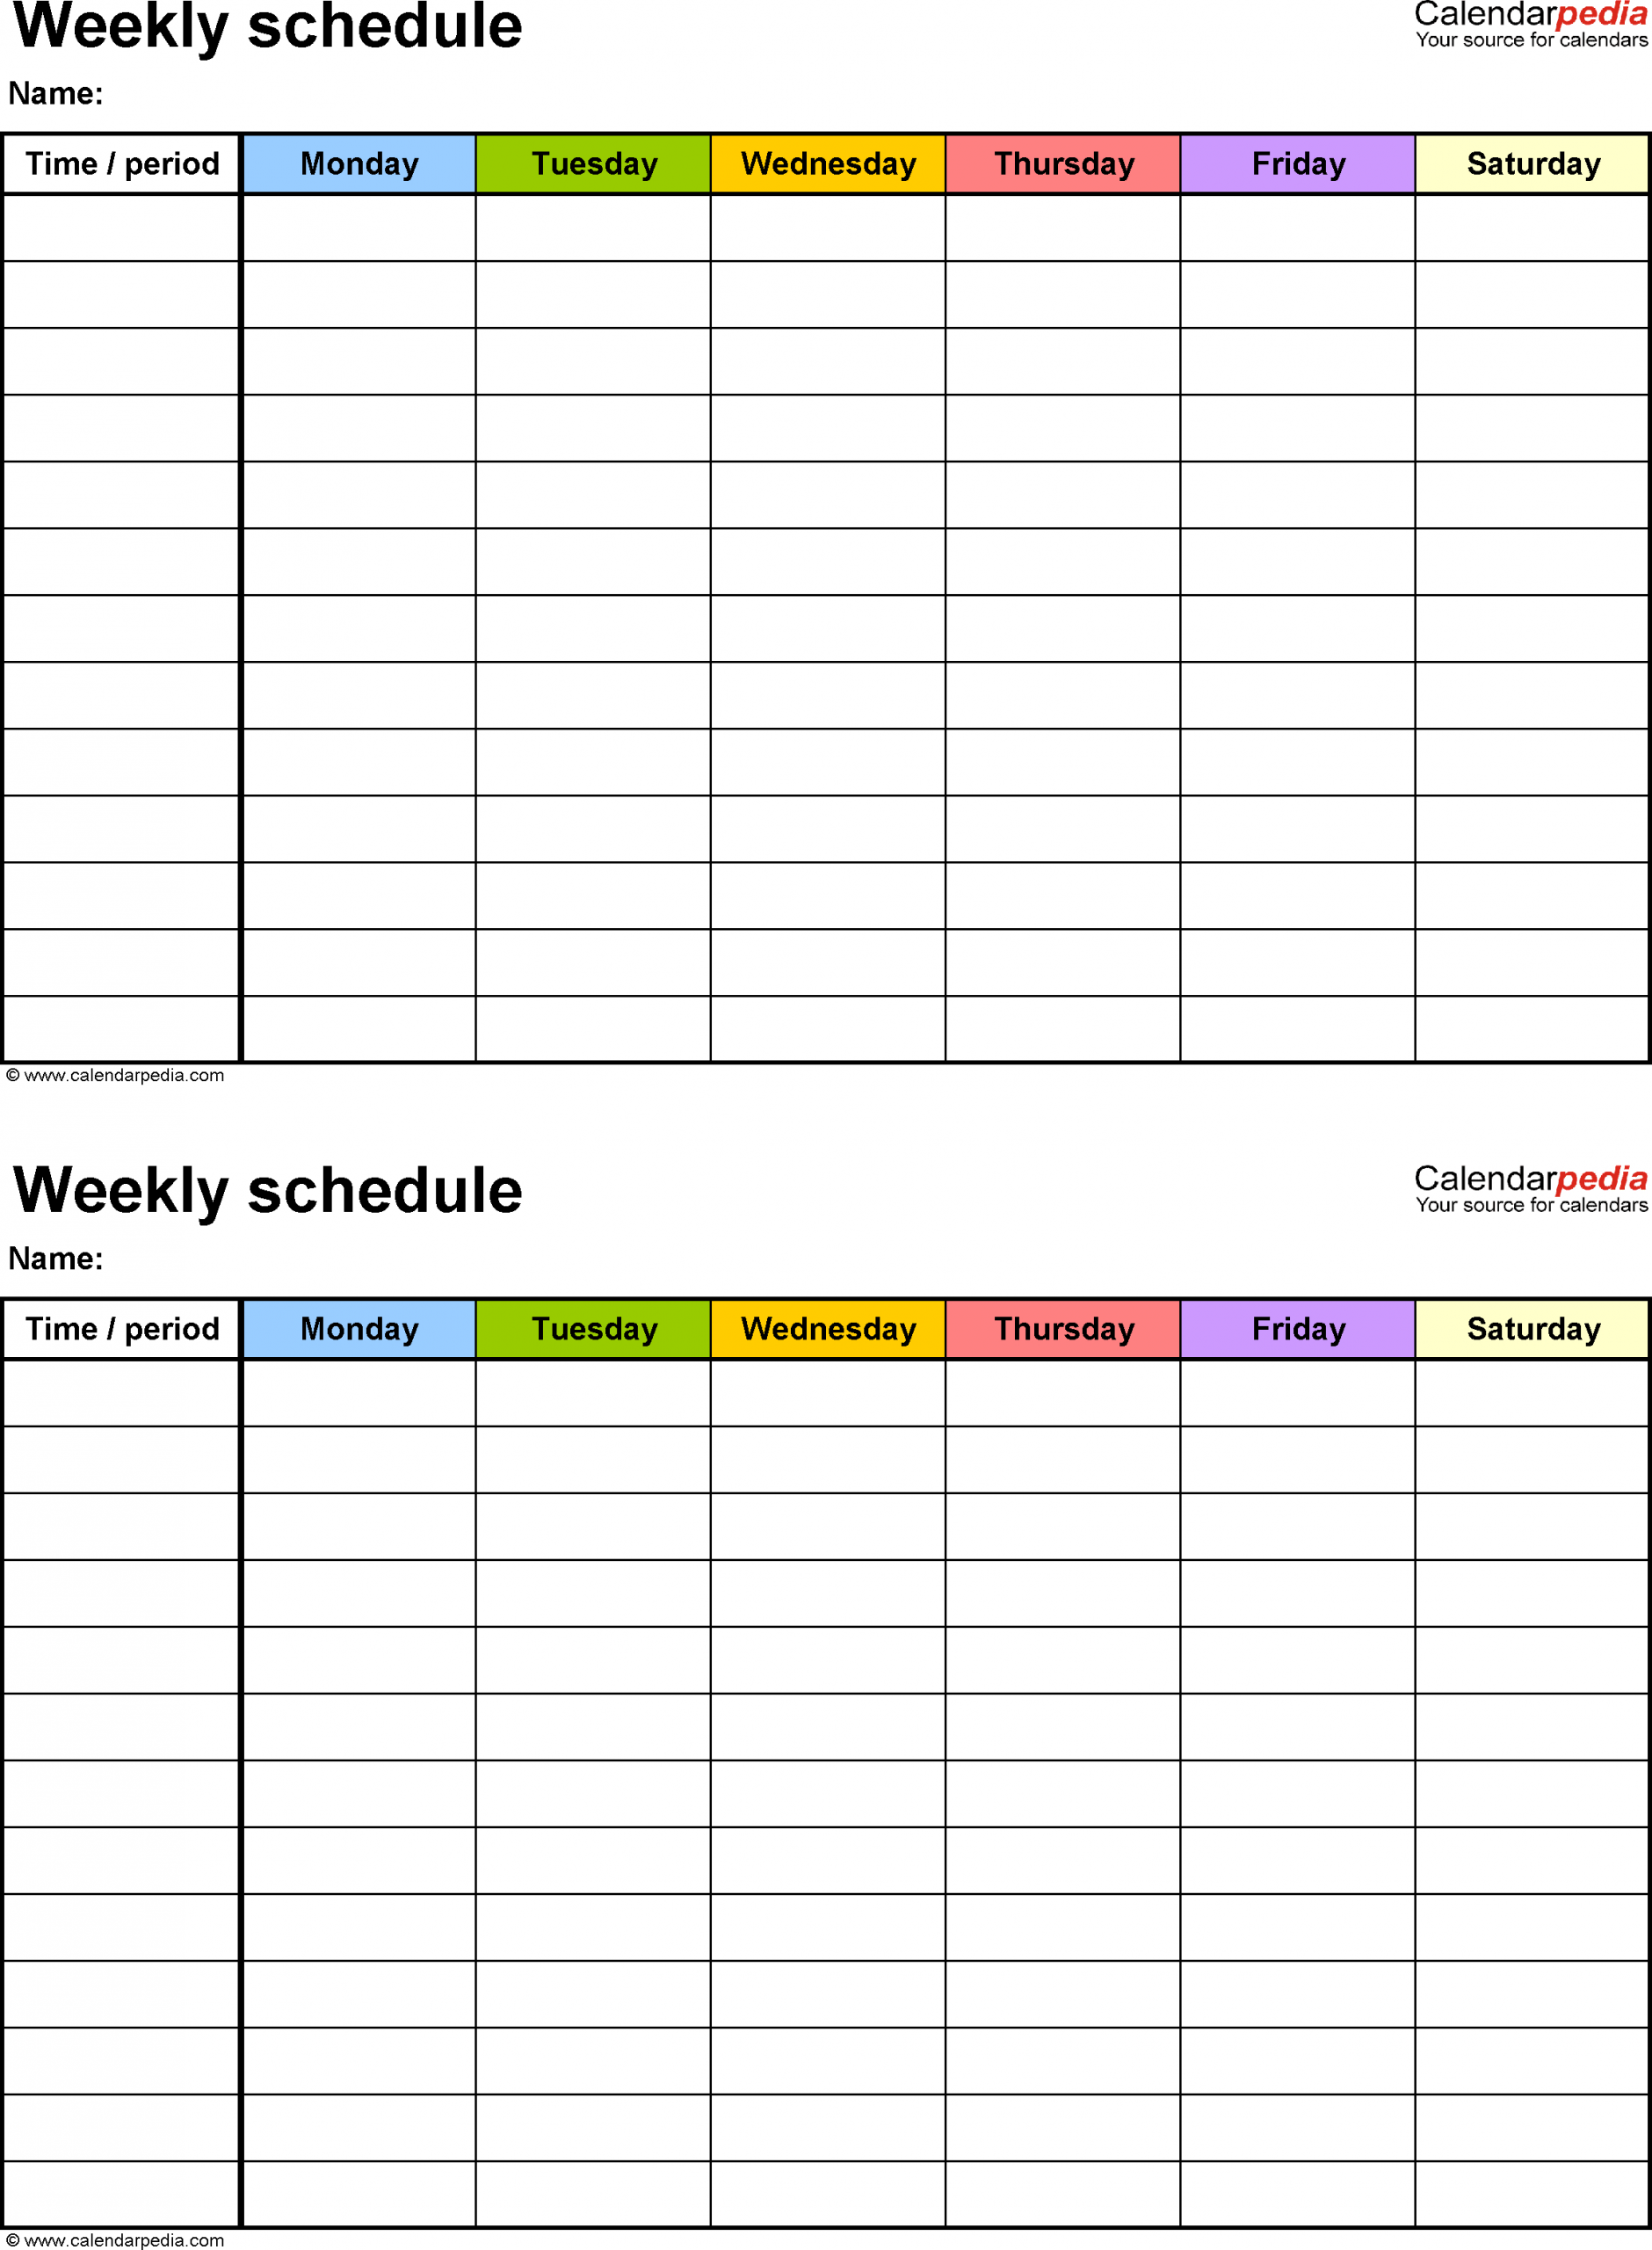 Free Weekly Schedule Templates For Word - 18 Templates 6 Months Calendar Word